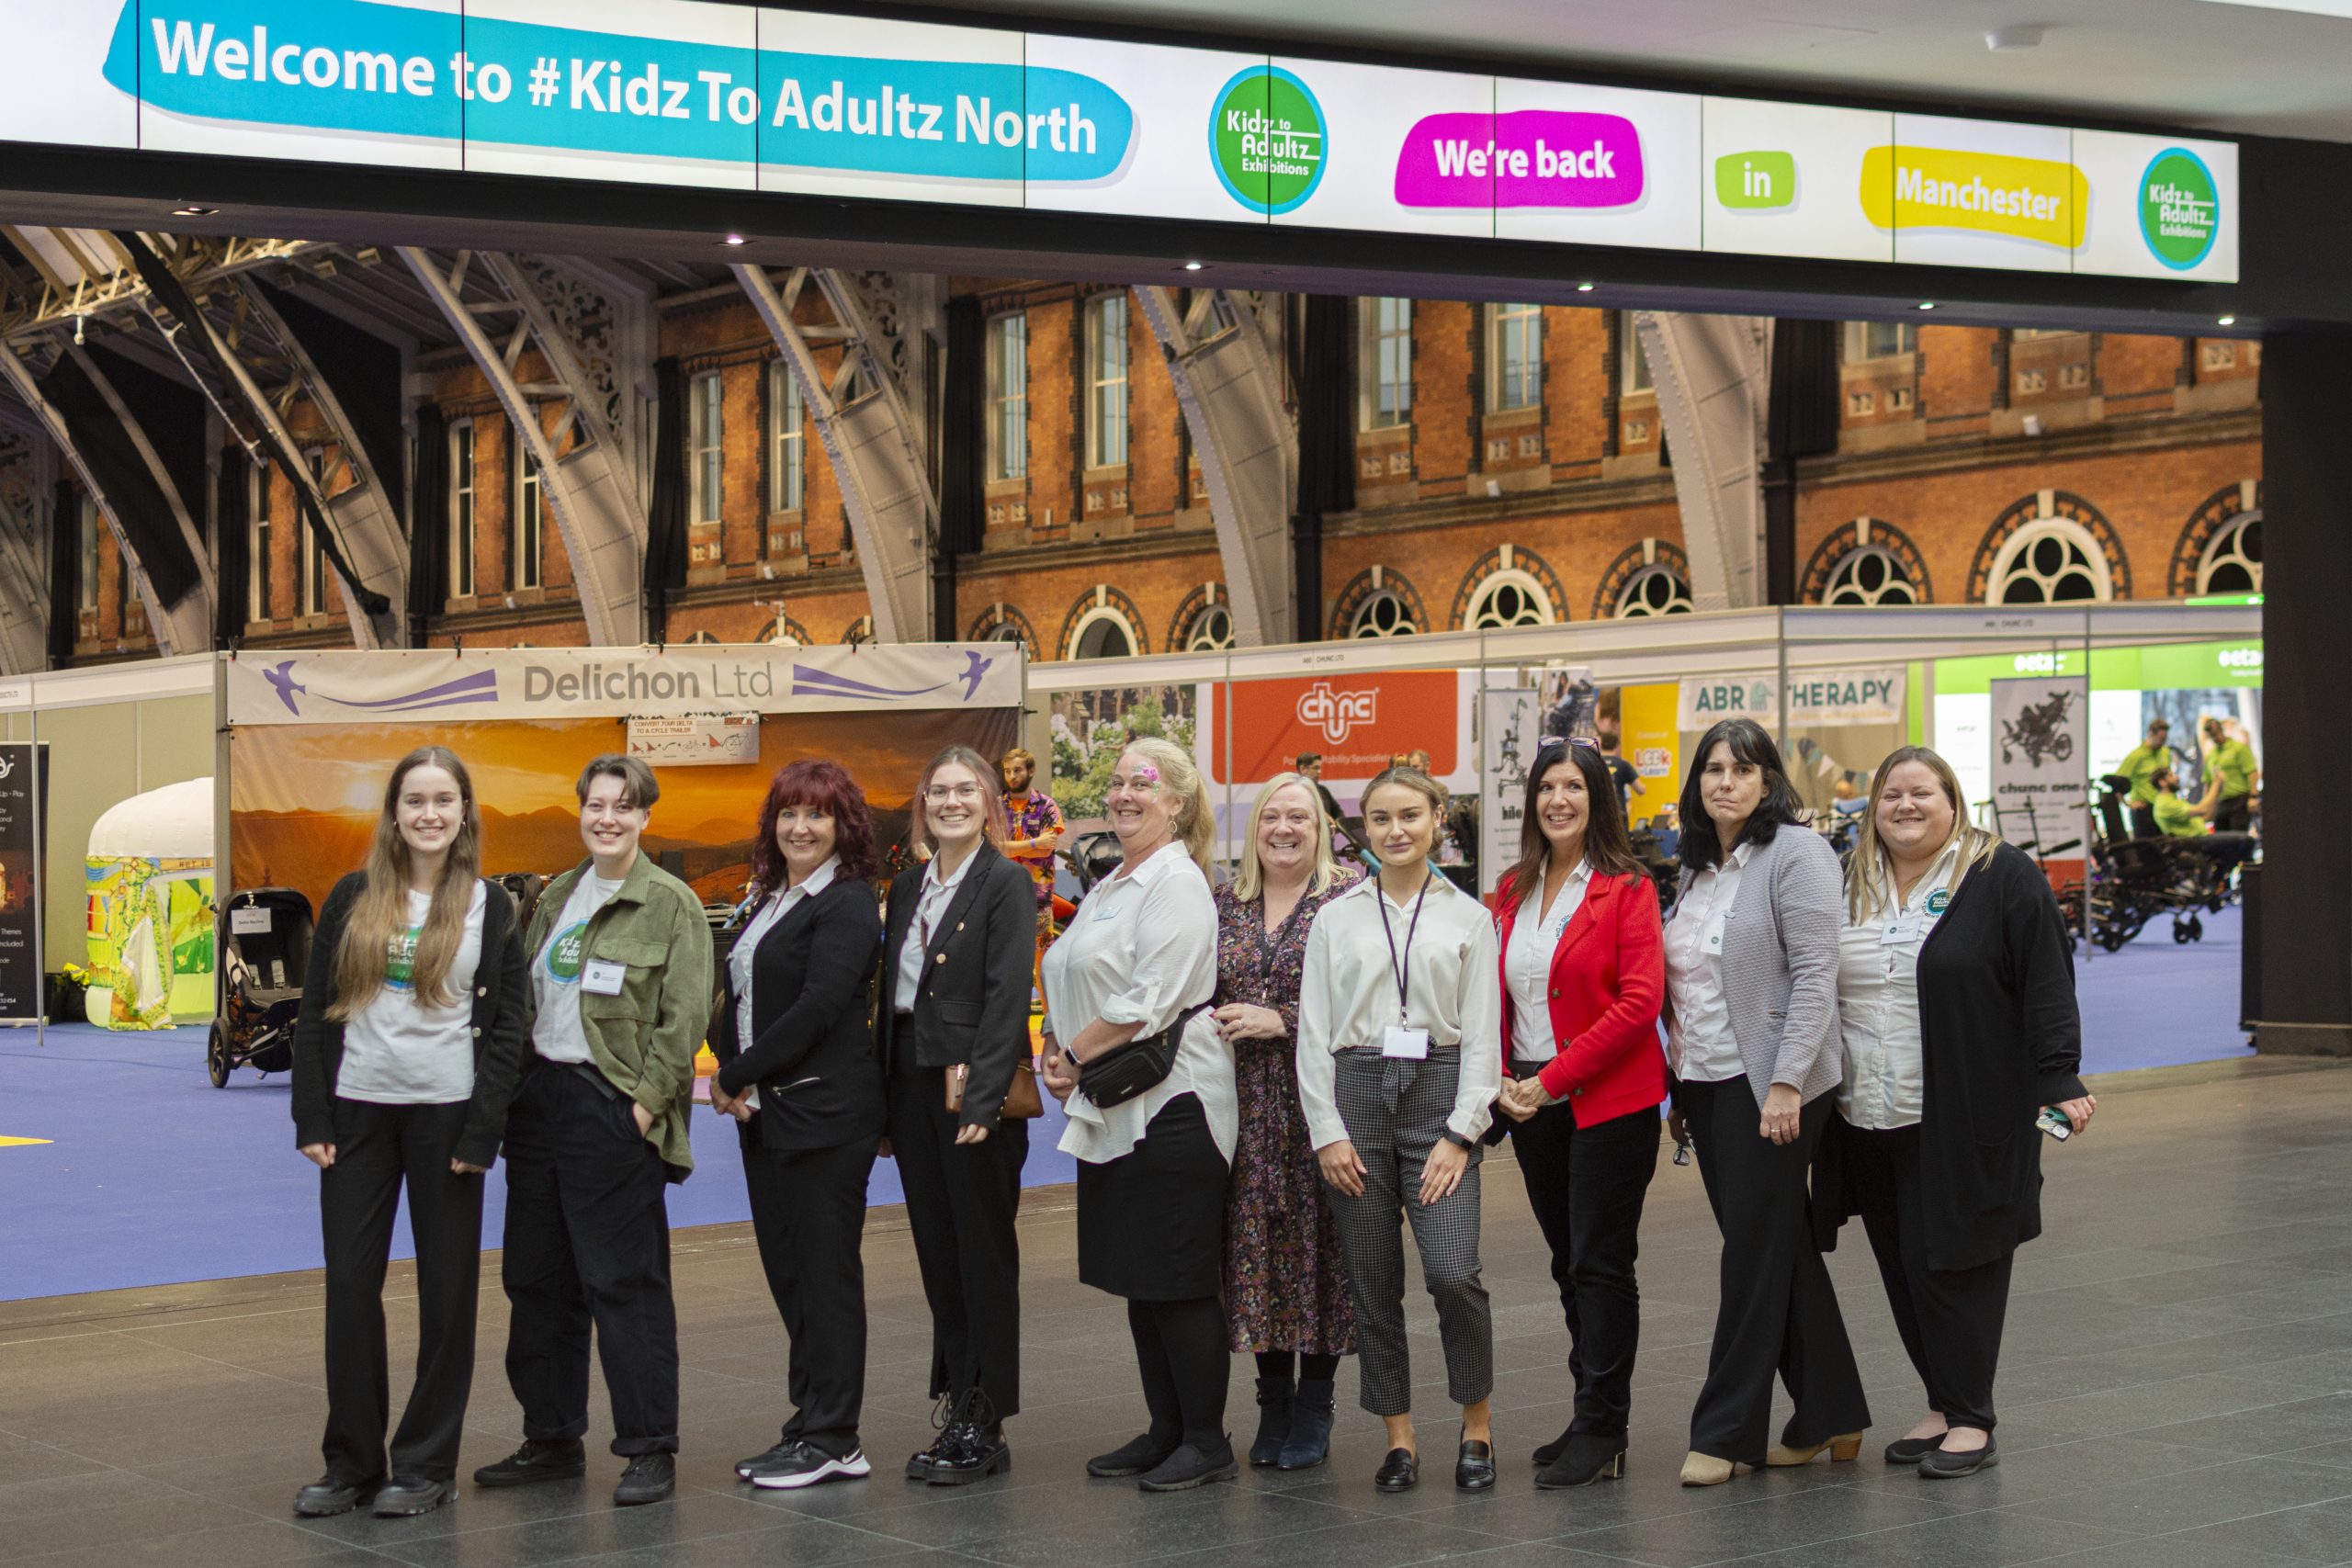 Kidz to Adultz Team photo at the entrance to the North exhibition